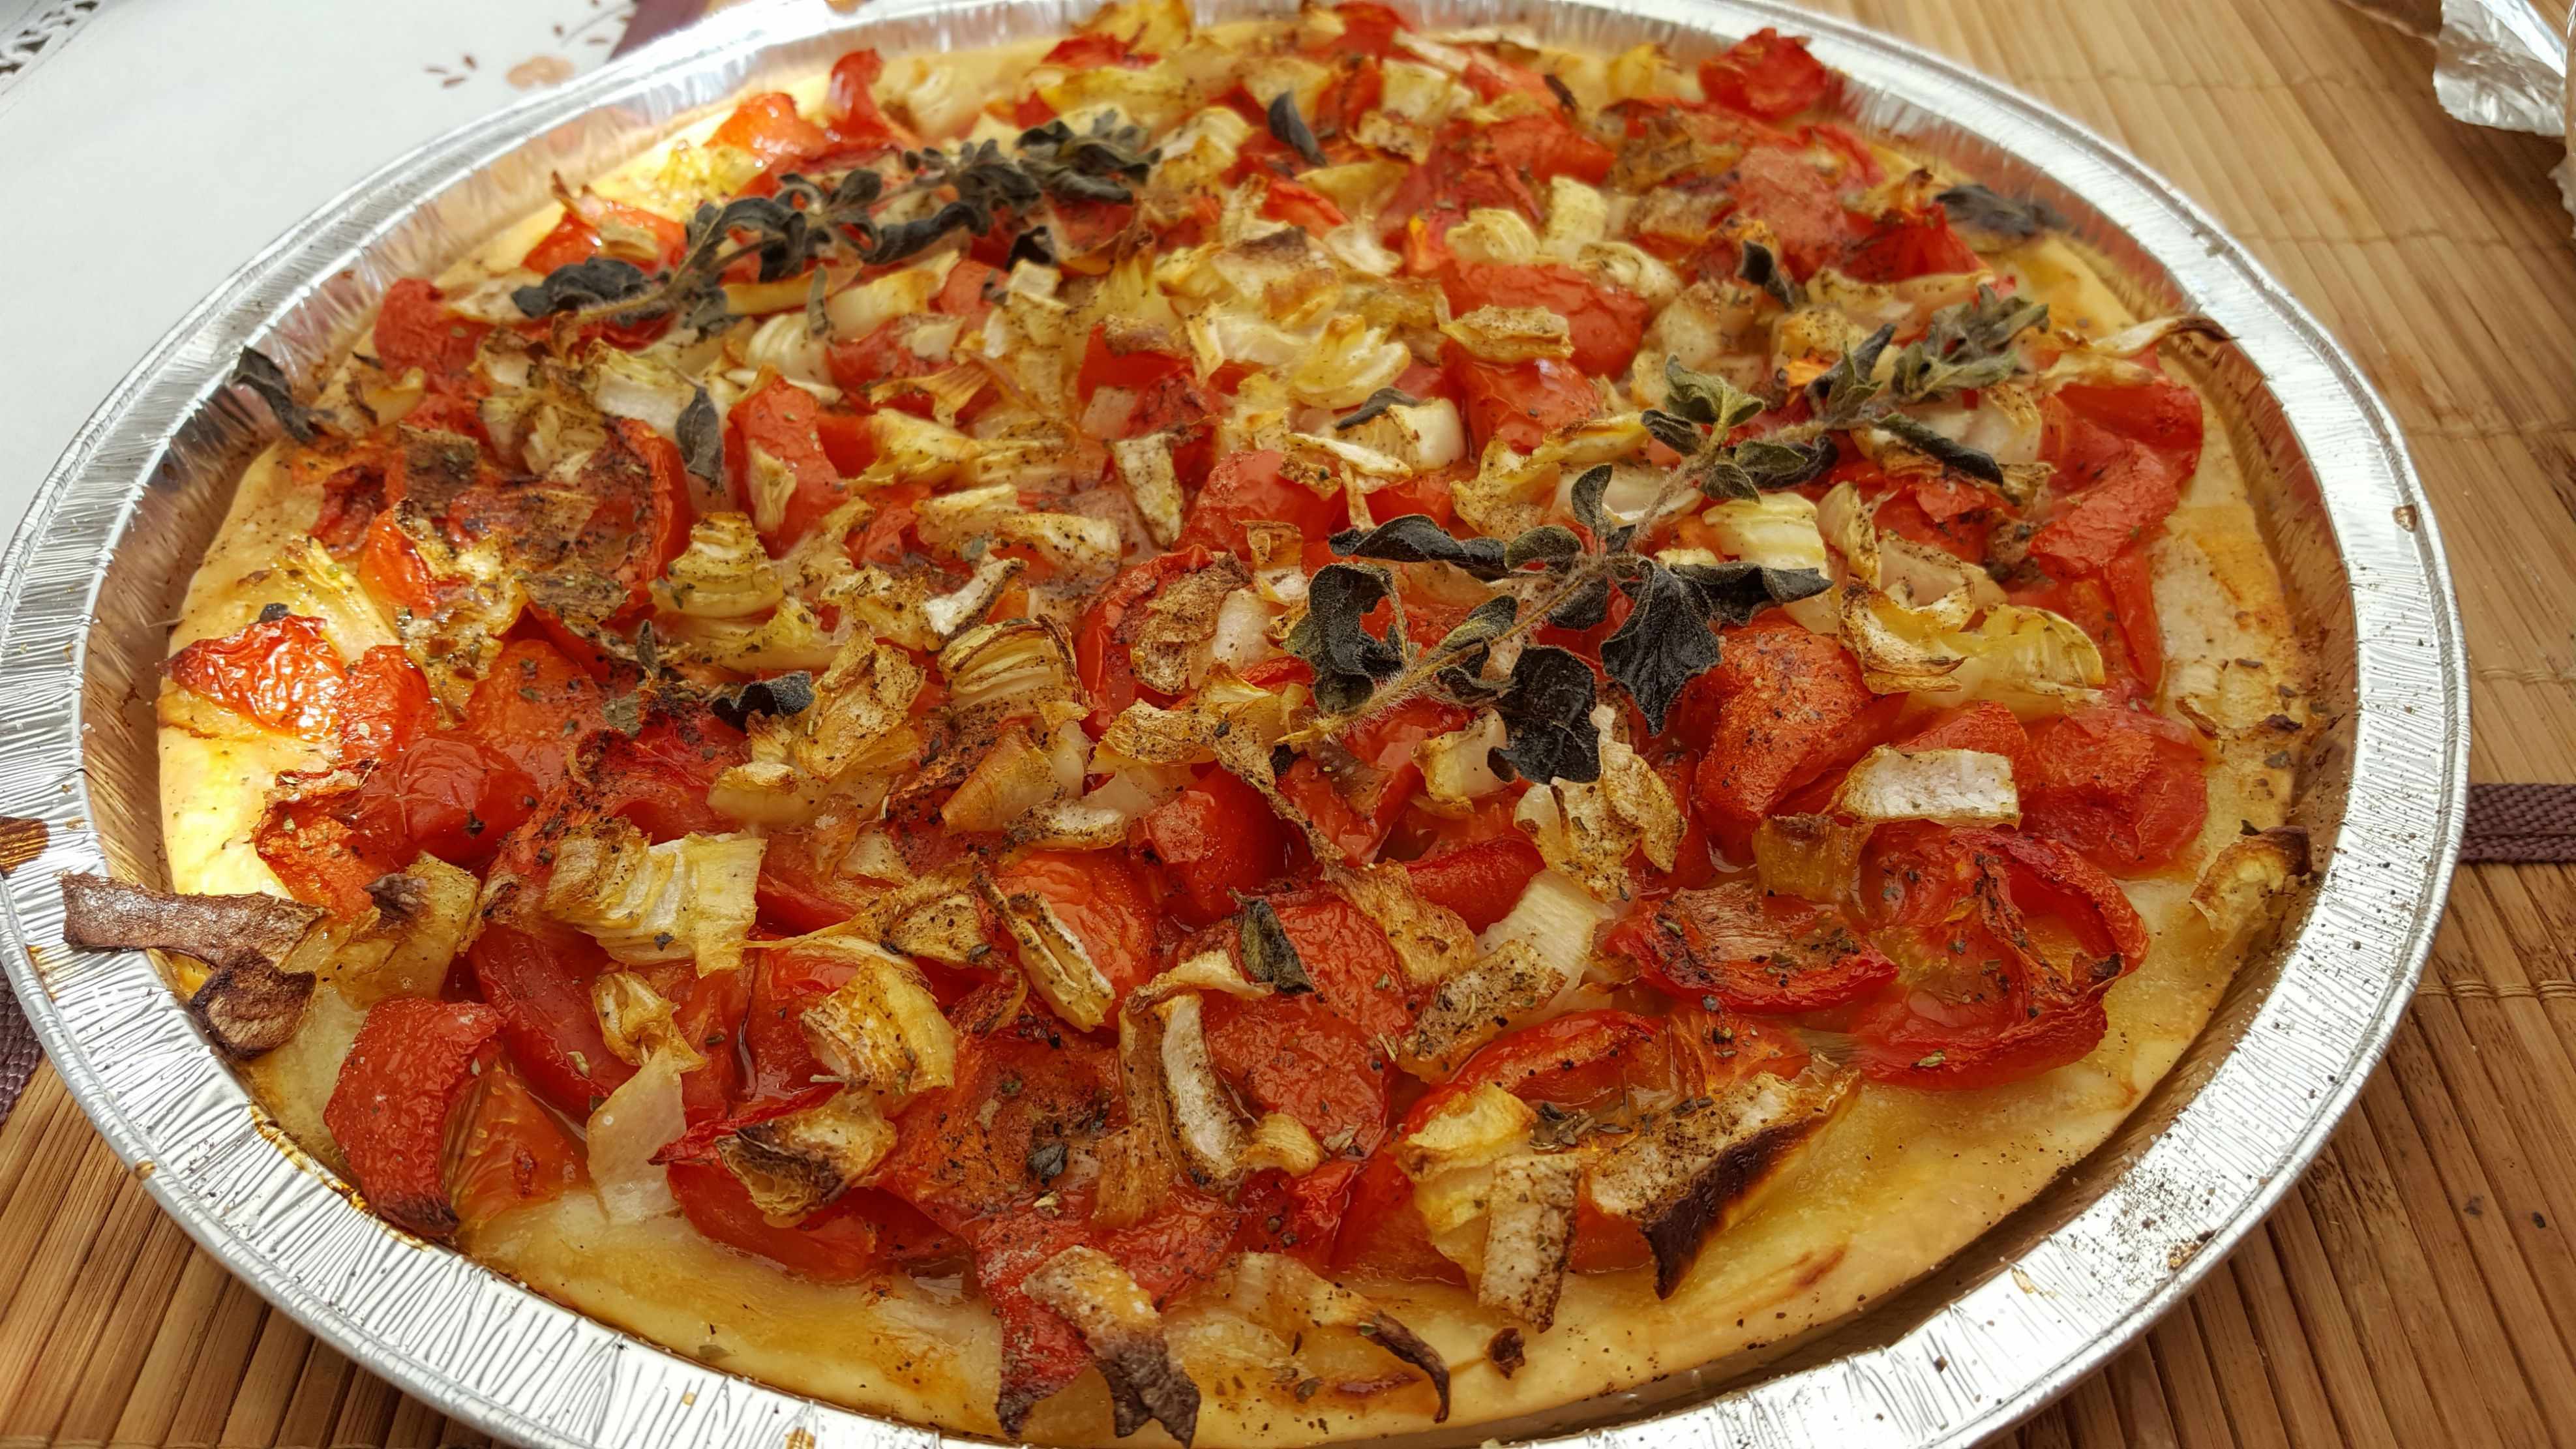 Open pie with tomatoes and onions